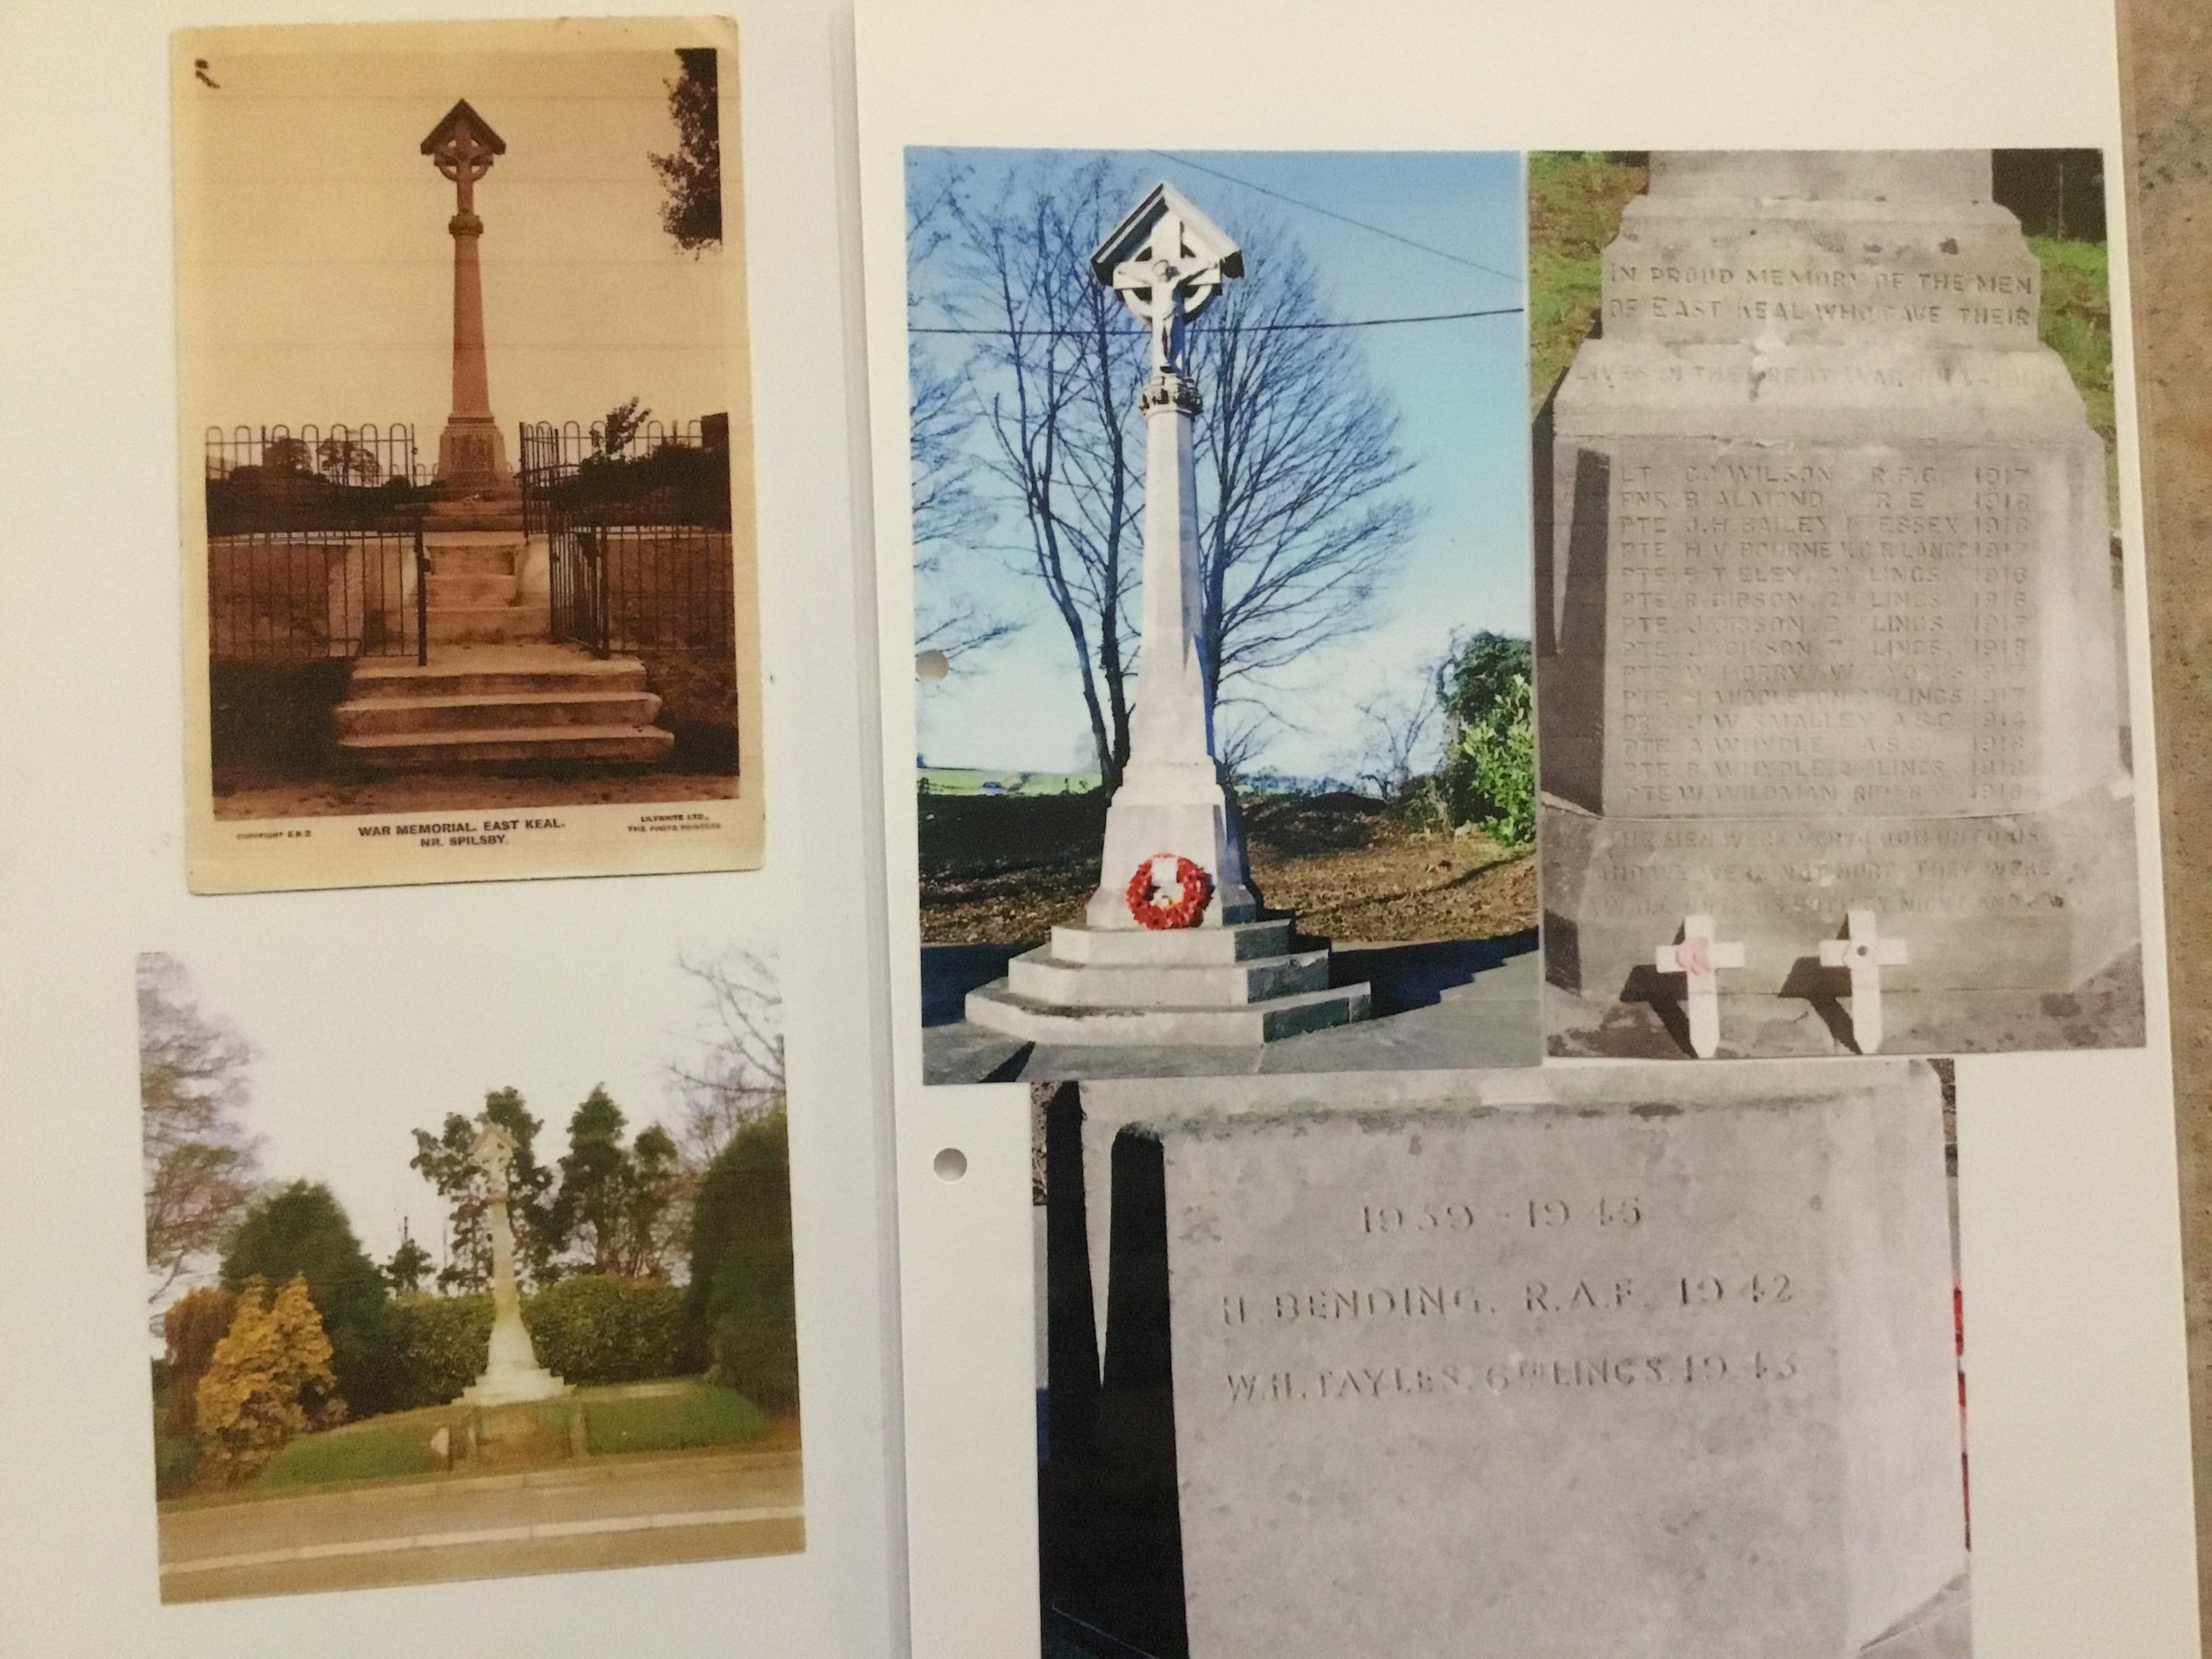 Some changes to the war memorial